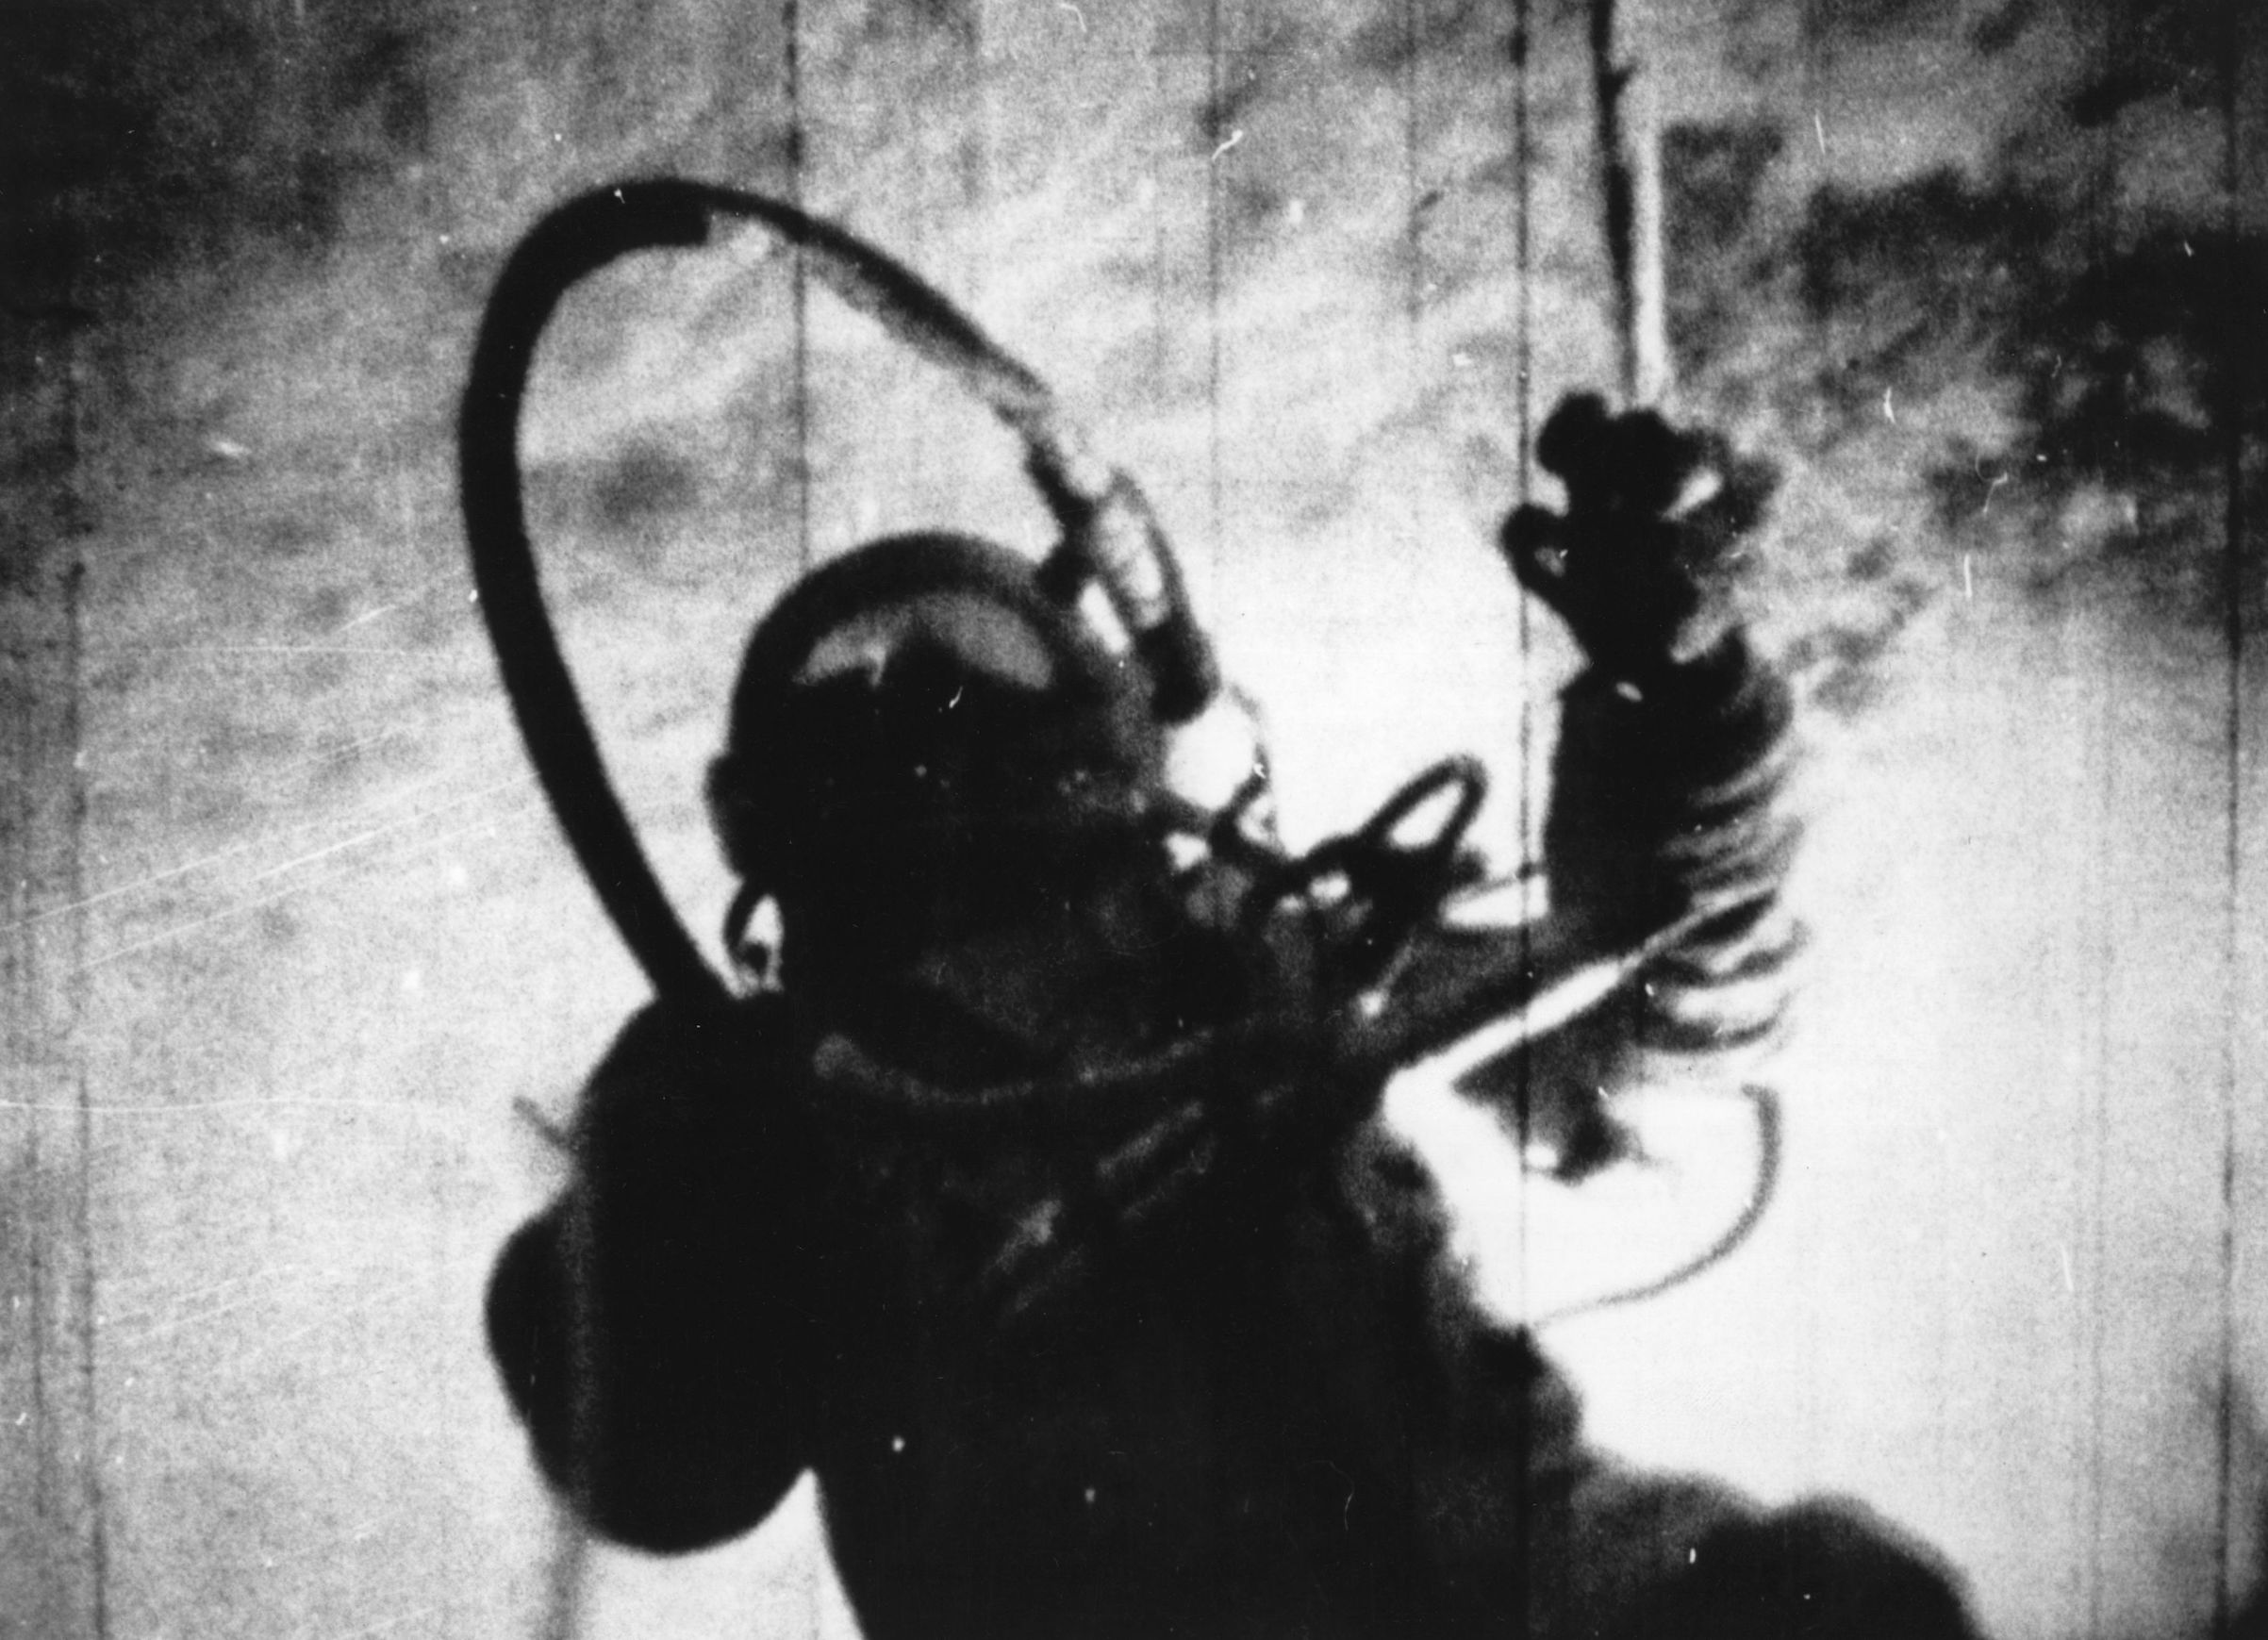 Russian astronaut Alexei Arkhipovich Leonov becomes the first man to walk in space, on March 18, 1965. (Getty Images)